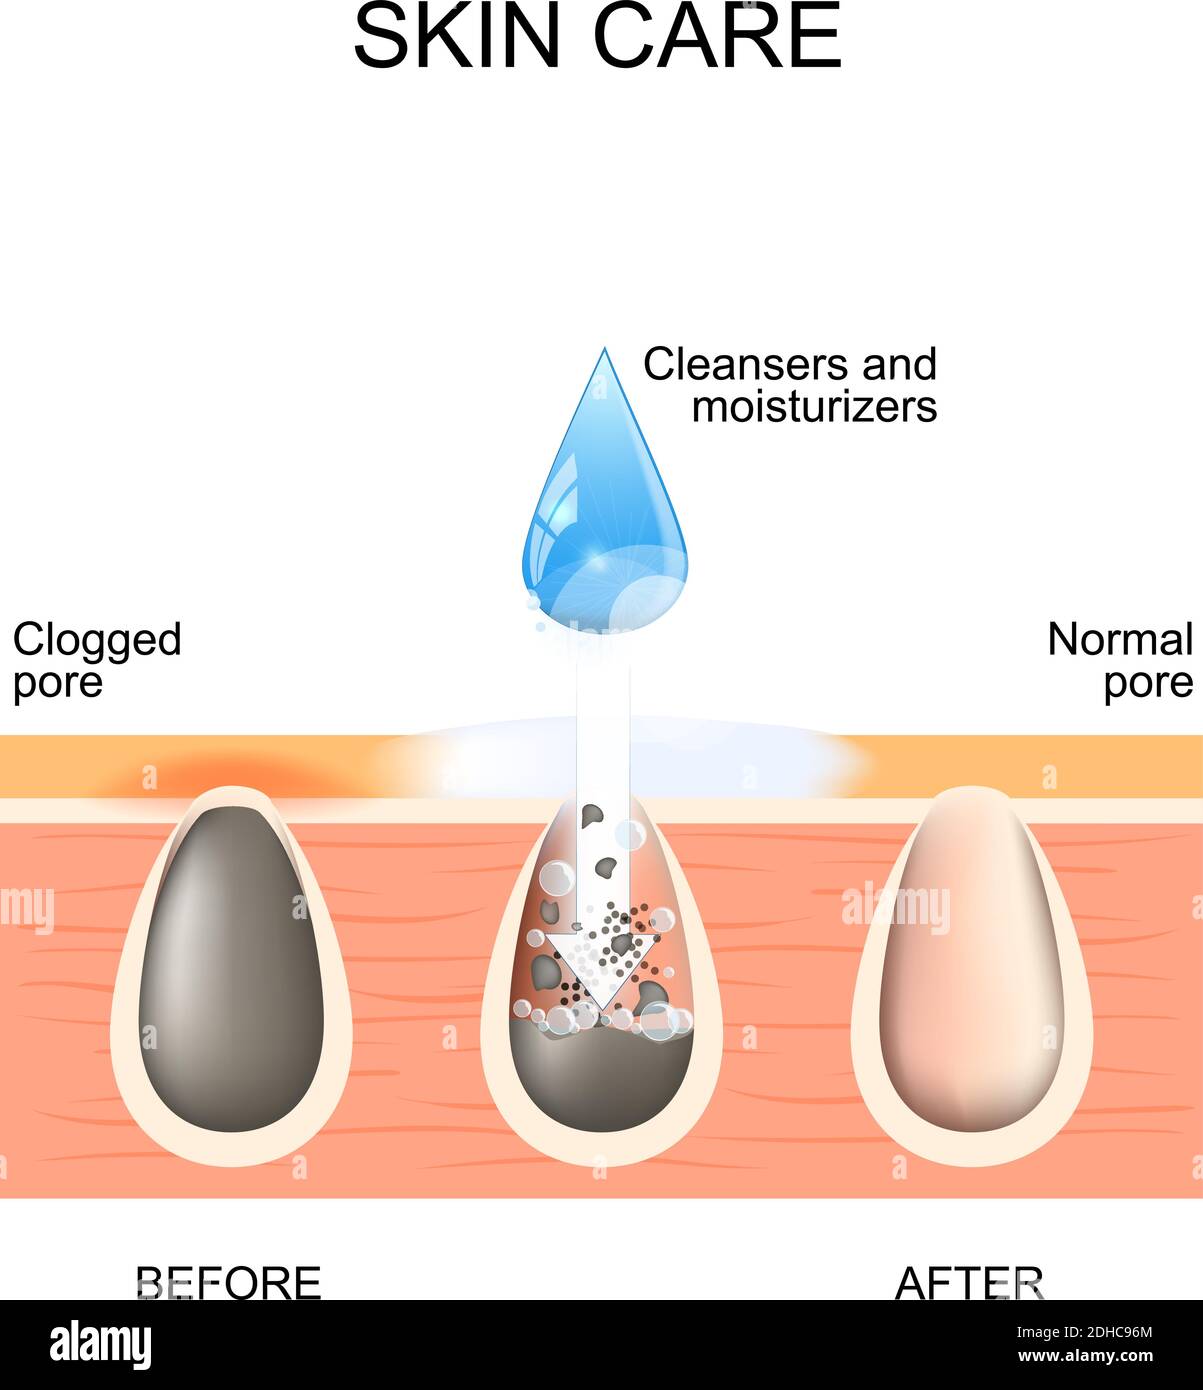 Skin care. Clogged and normal pores. Before and after using scrubs, cleansers and moisturizers Stock Vector